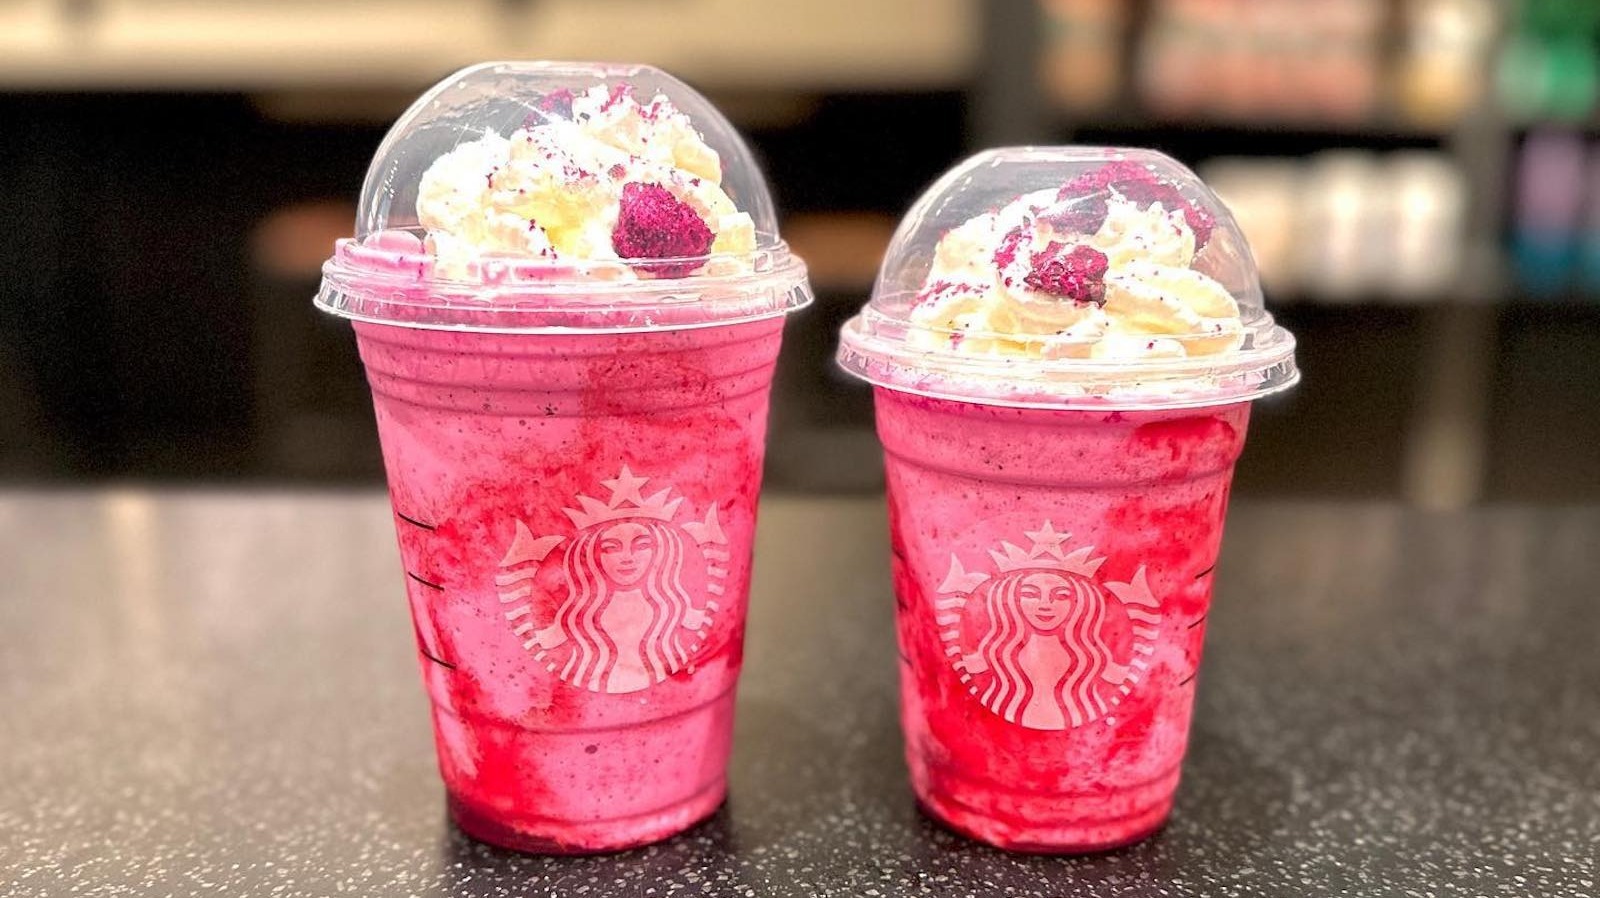 Starbucks’ Secret Barbie Frappuccino Gives New Meaning To The Words ‘Pink Drink’ – The Daily Meal